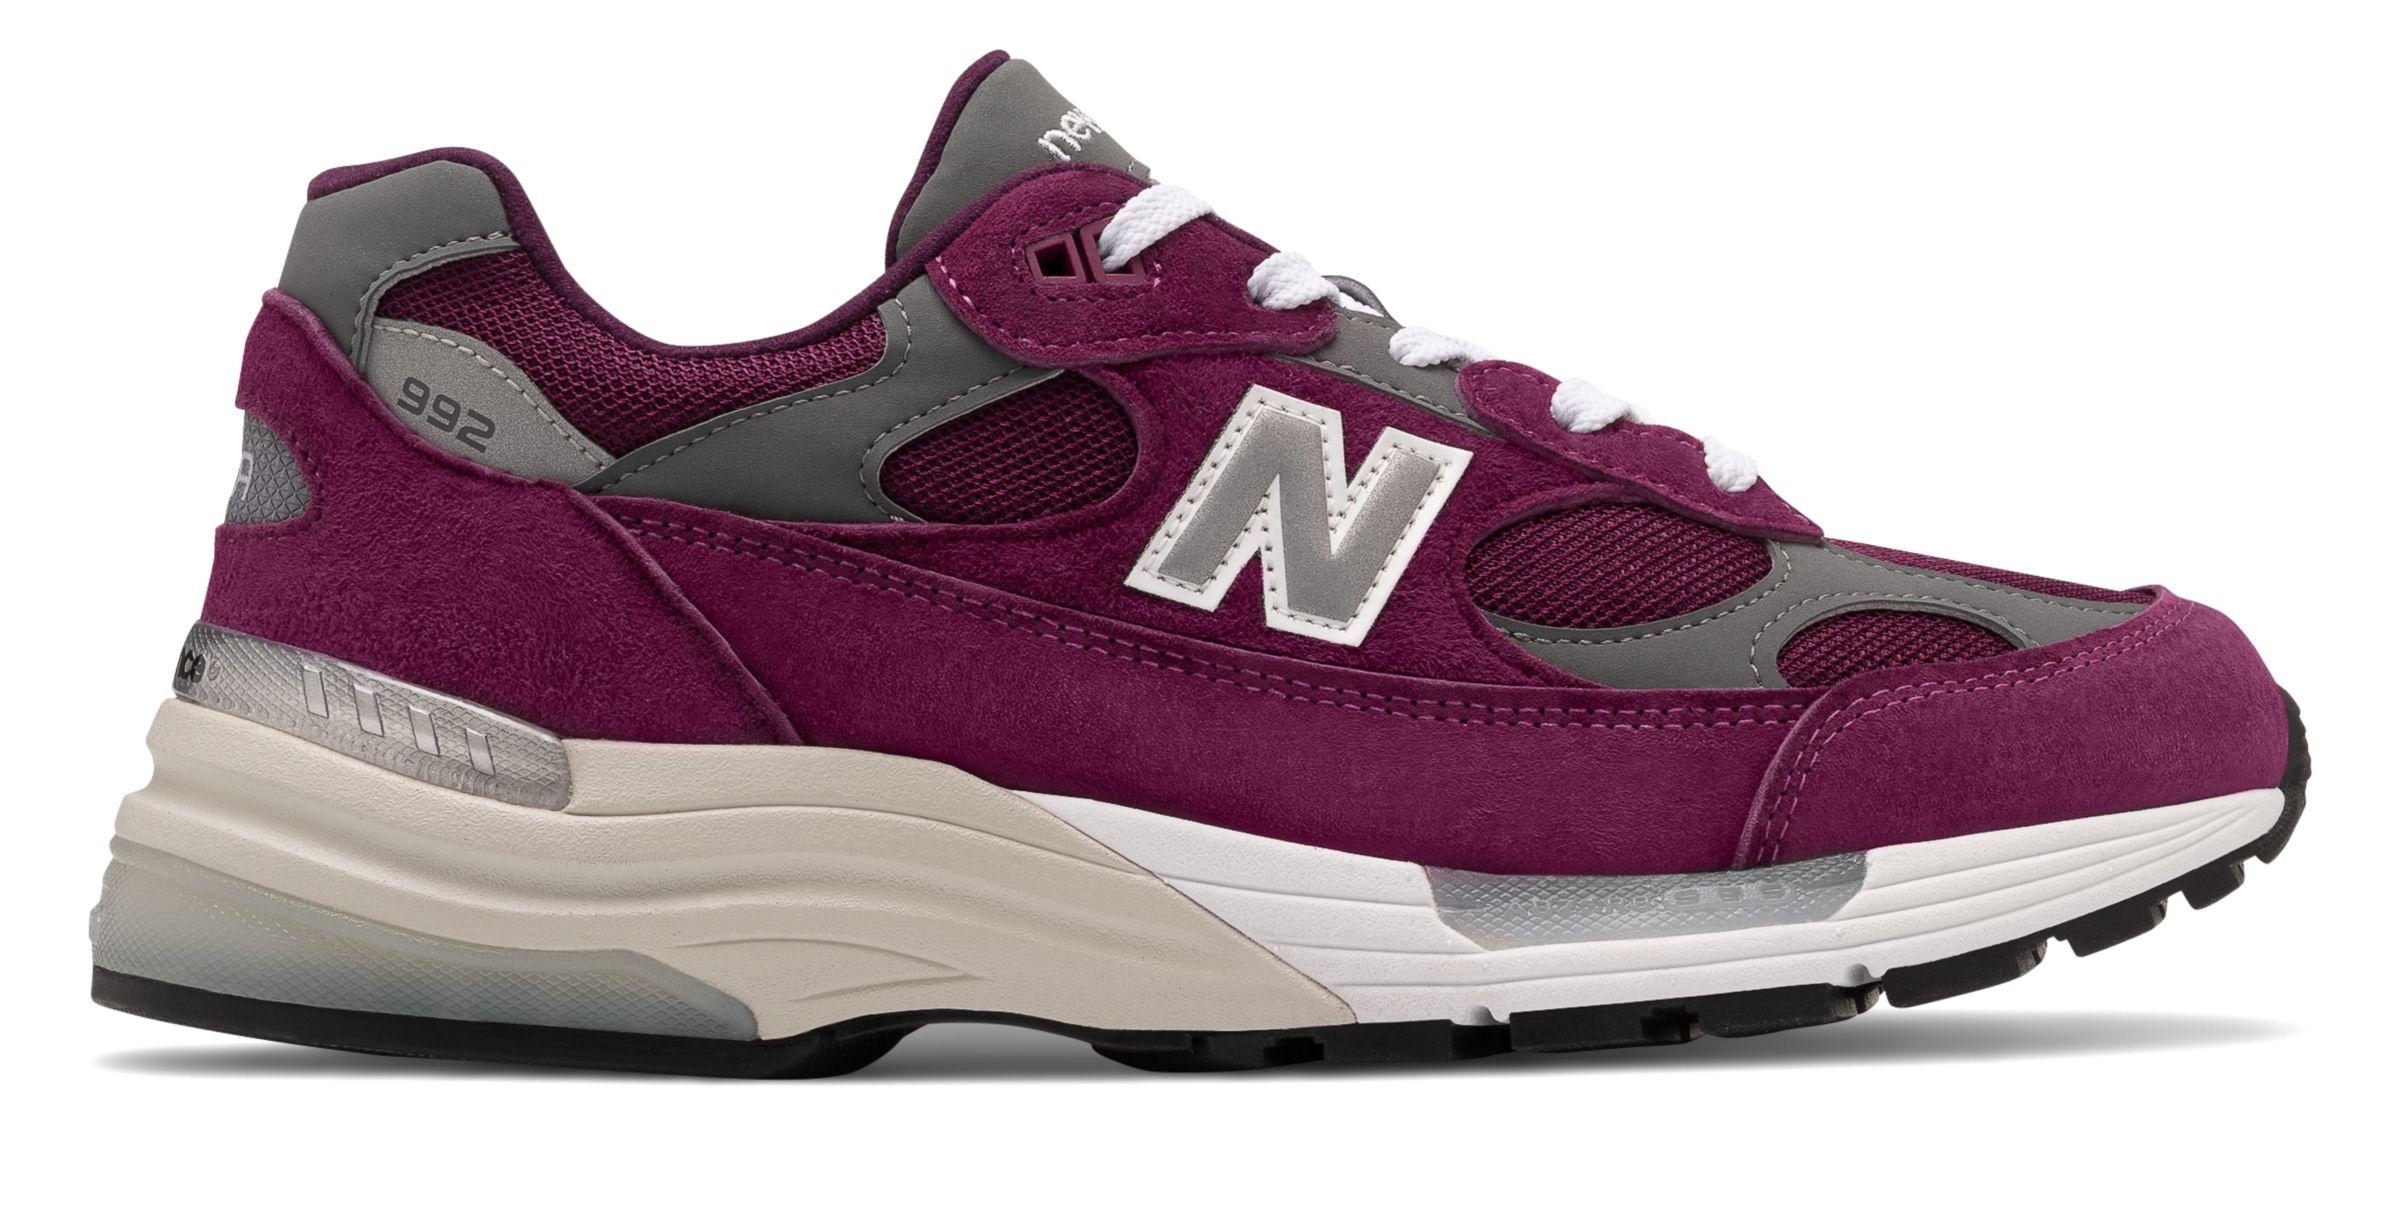 New Balance Made In Us 992 Made In Usa Shoes in Purple/Grey (Purple ...